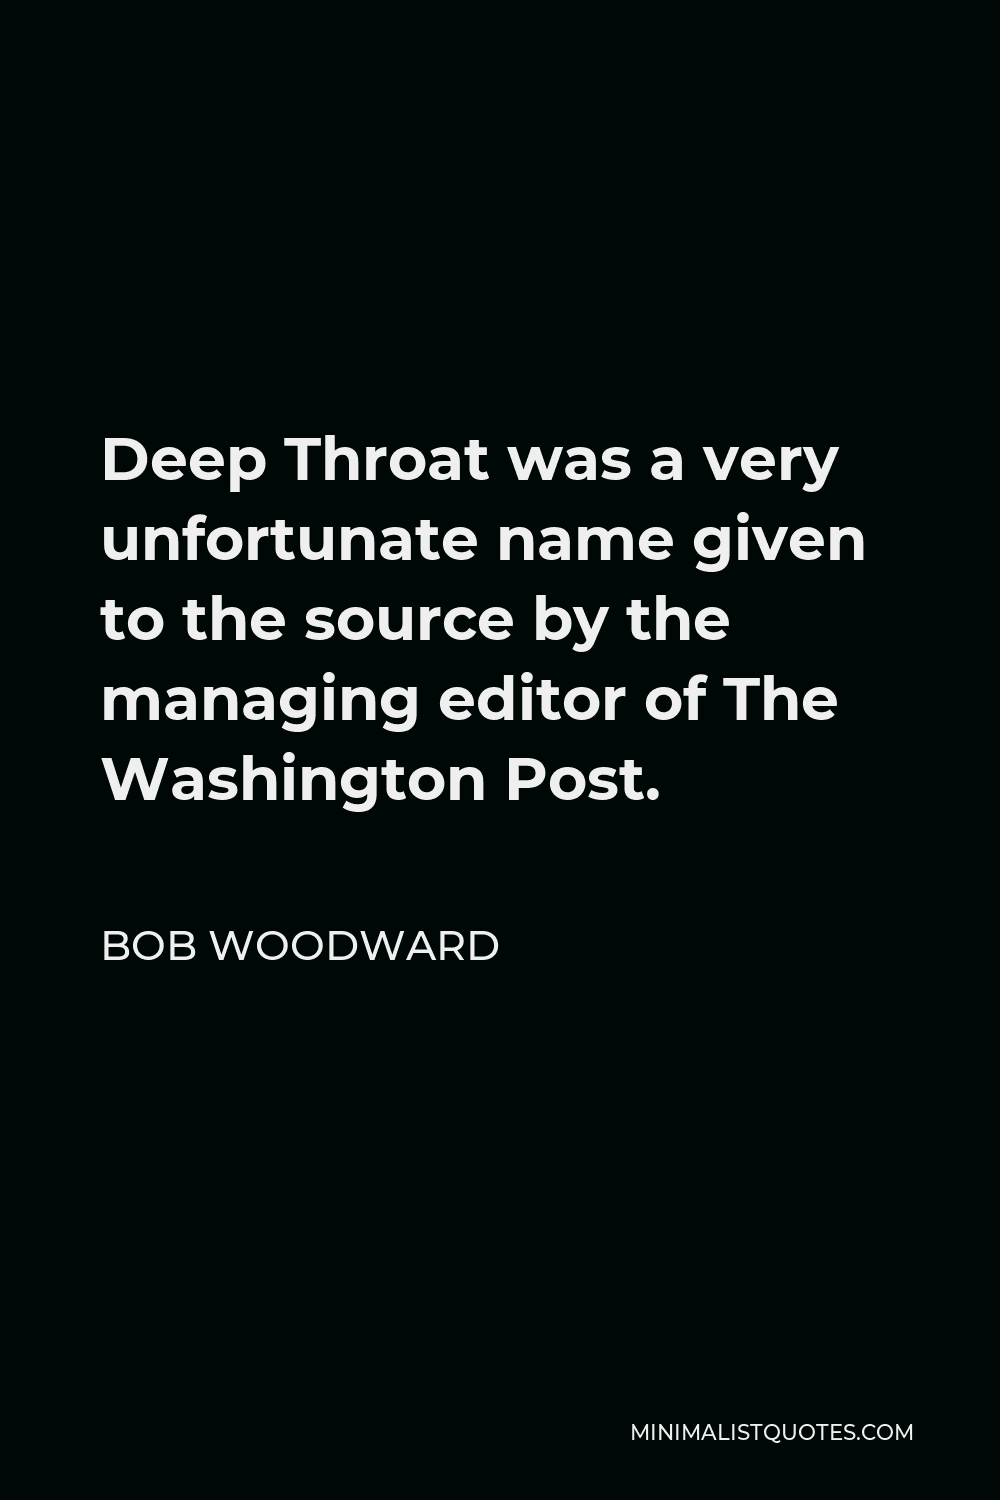 Bob Woodward Quote - Deep Throat was a very unfortunate name given to the source by the managing editor of The Washington Post.